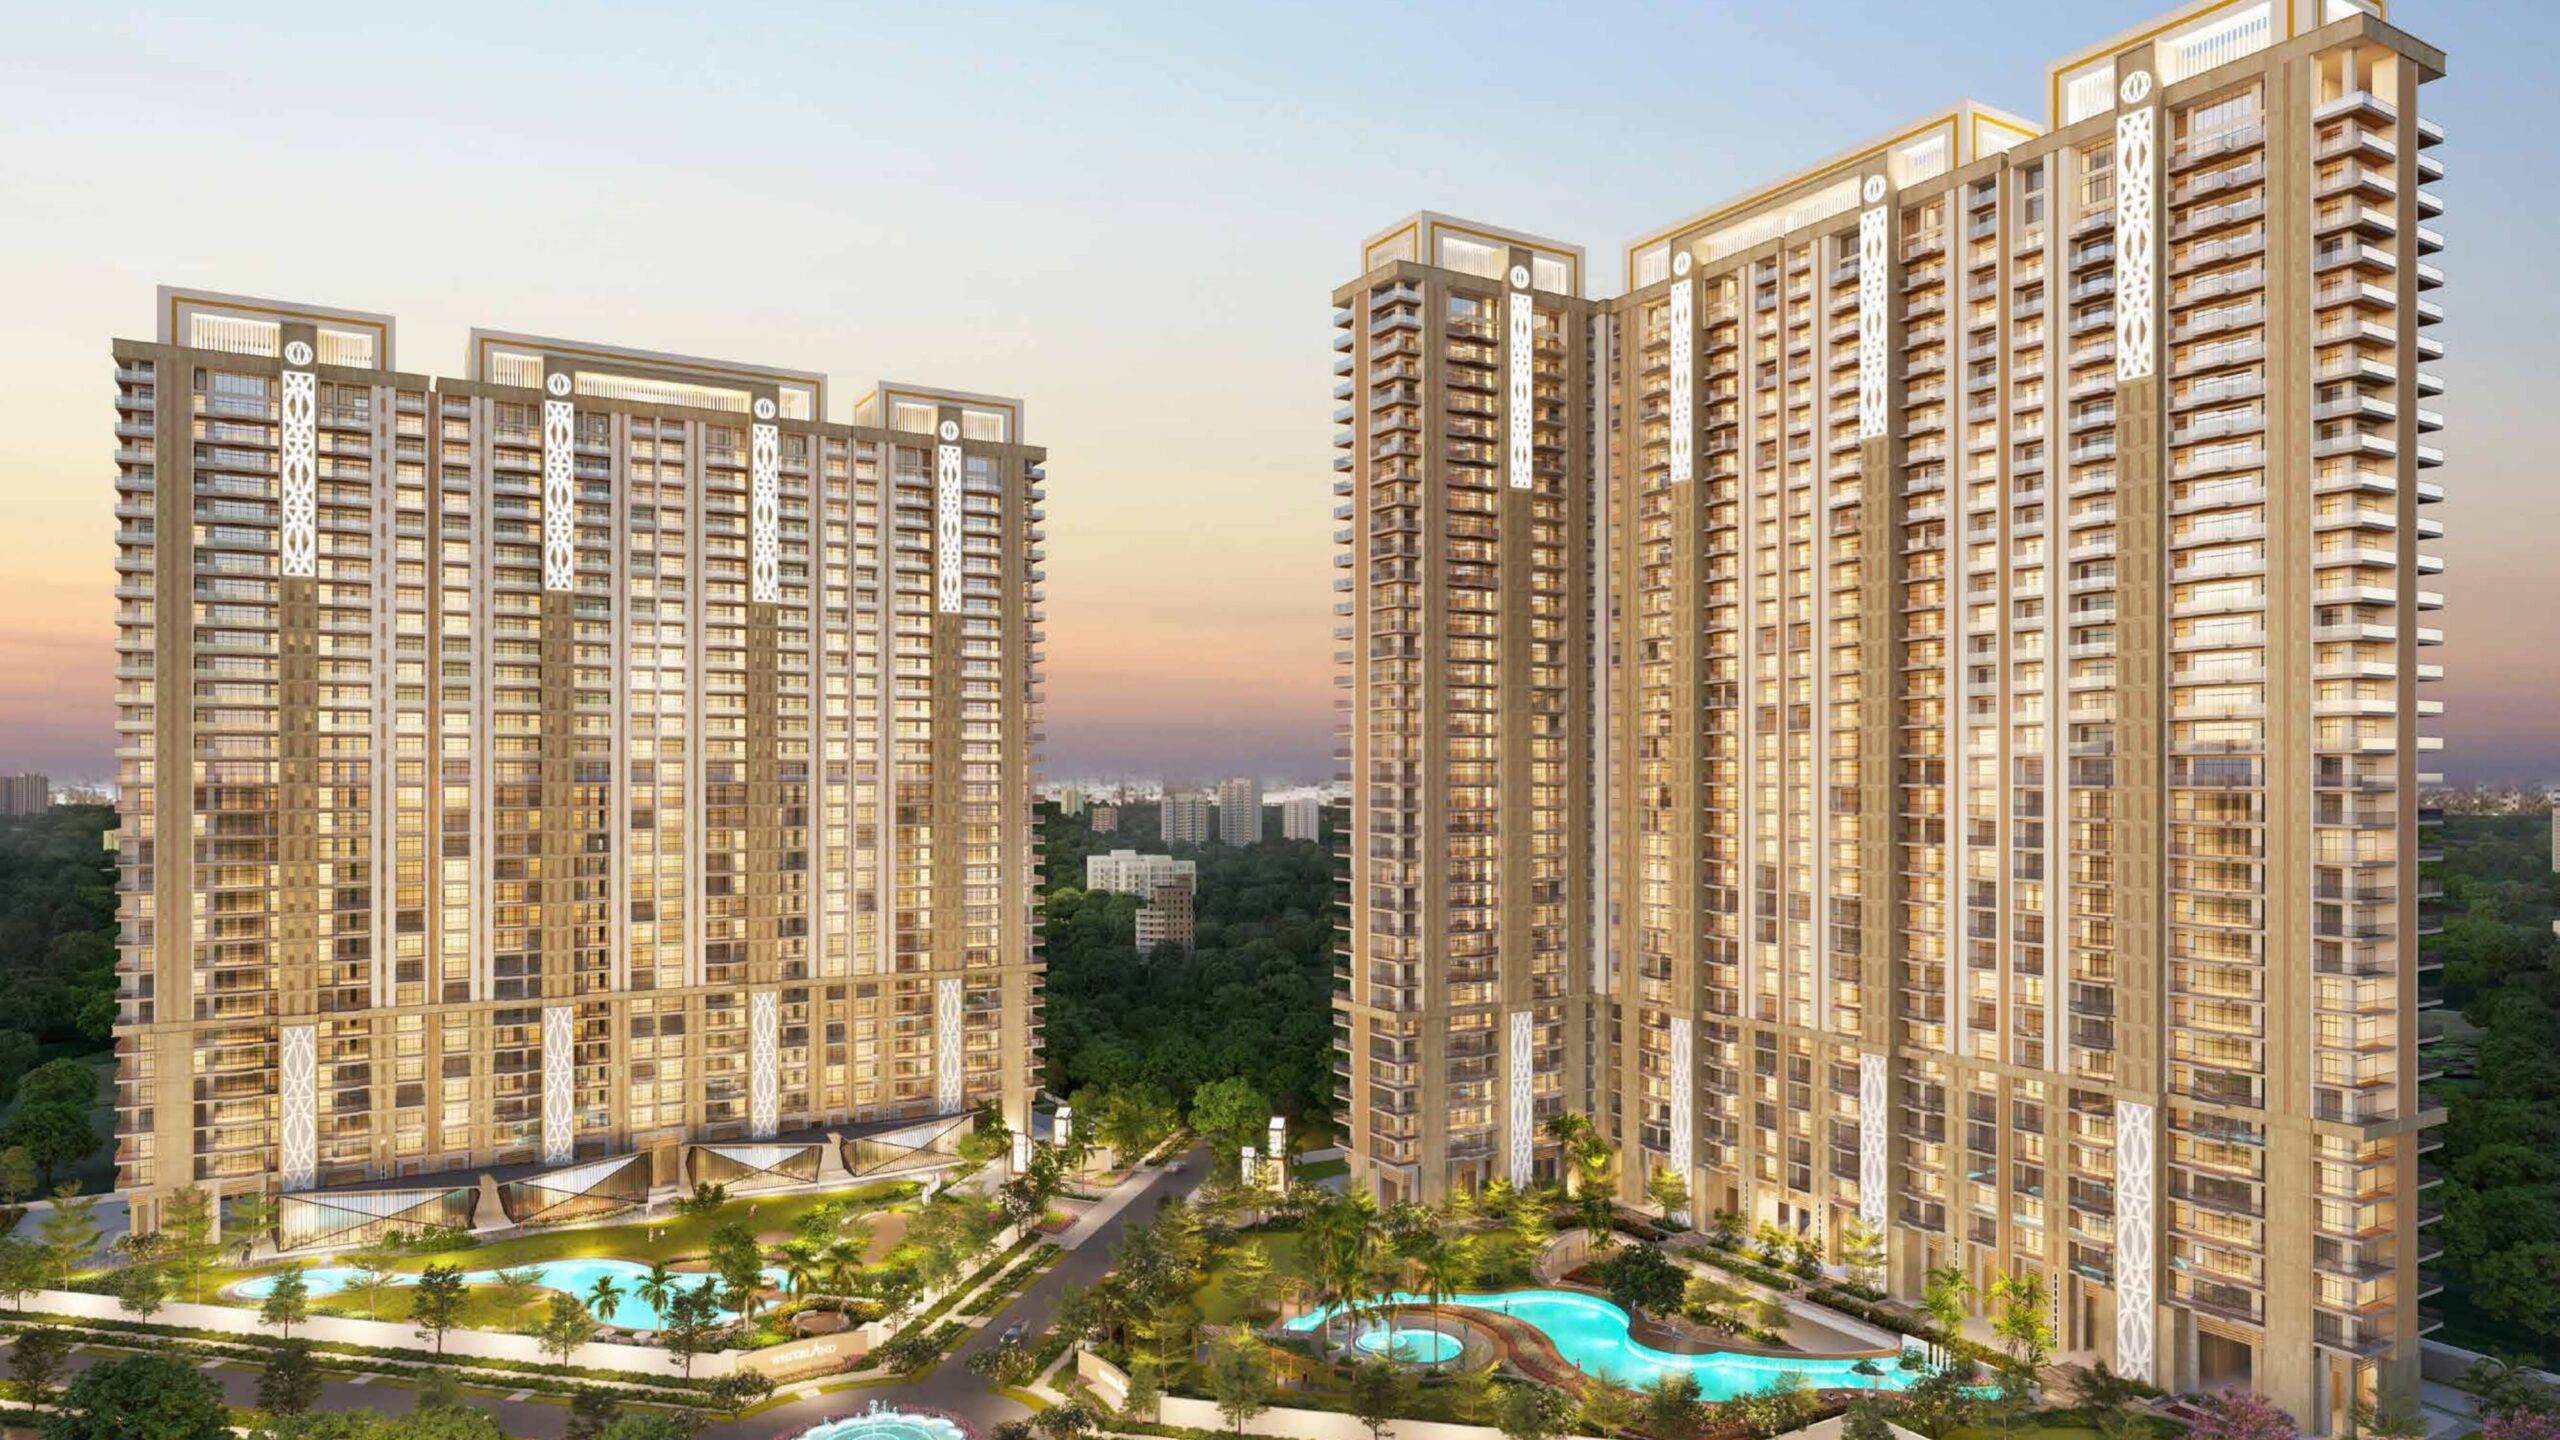 Whiteland The Aspen Sector 76 Gurgaon a New Way to Live